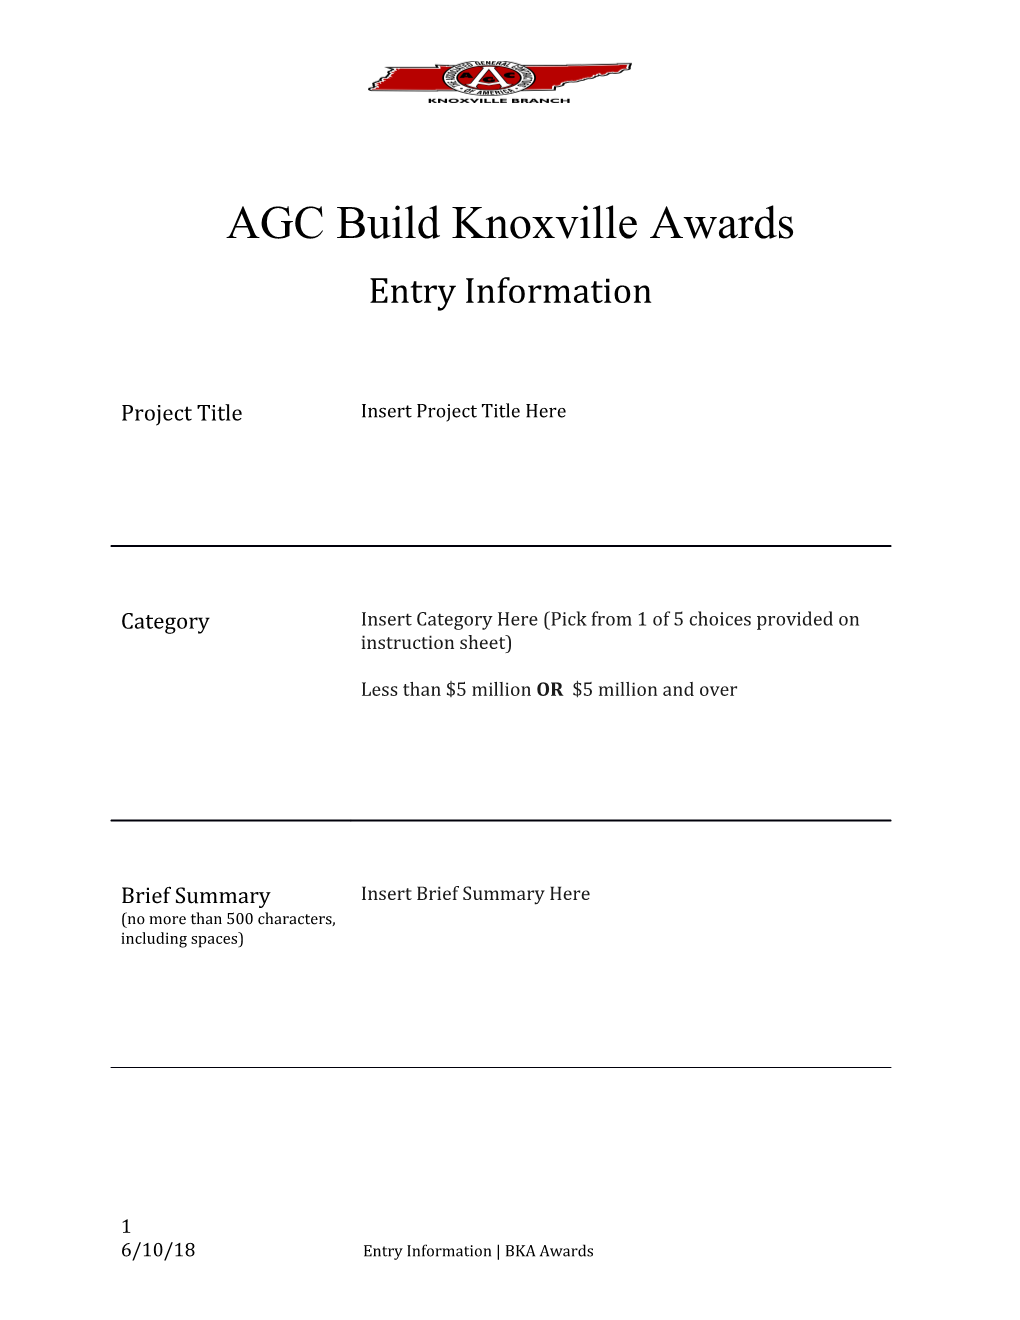 AGC Build Knoxville Awards